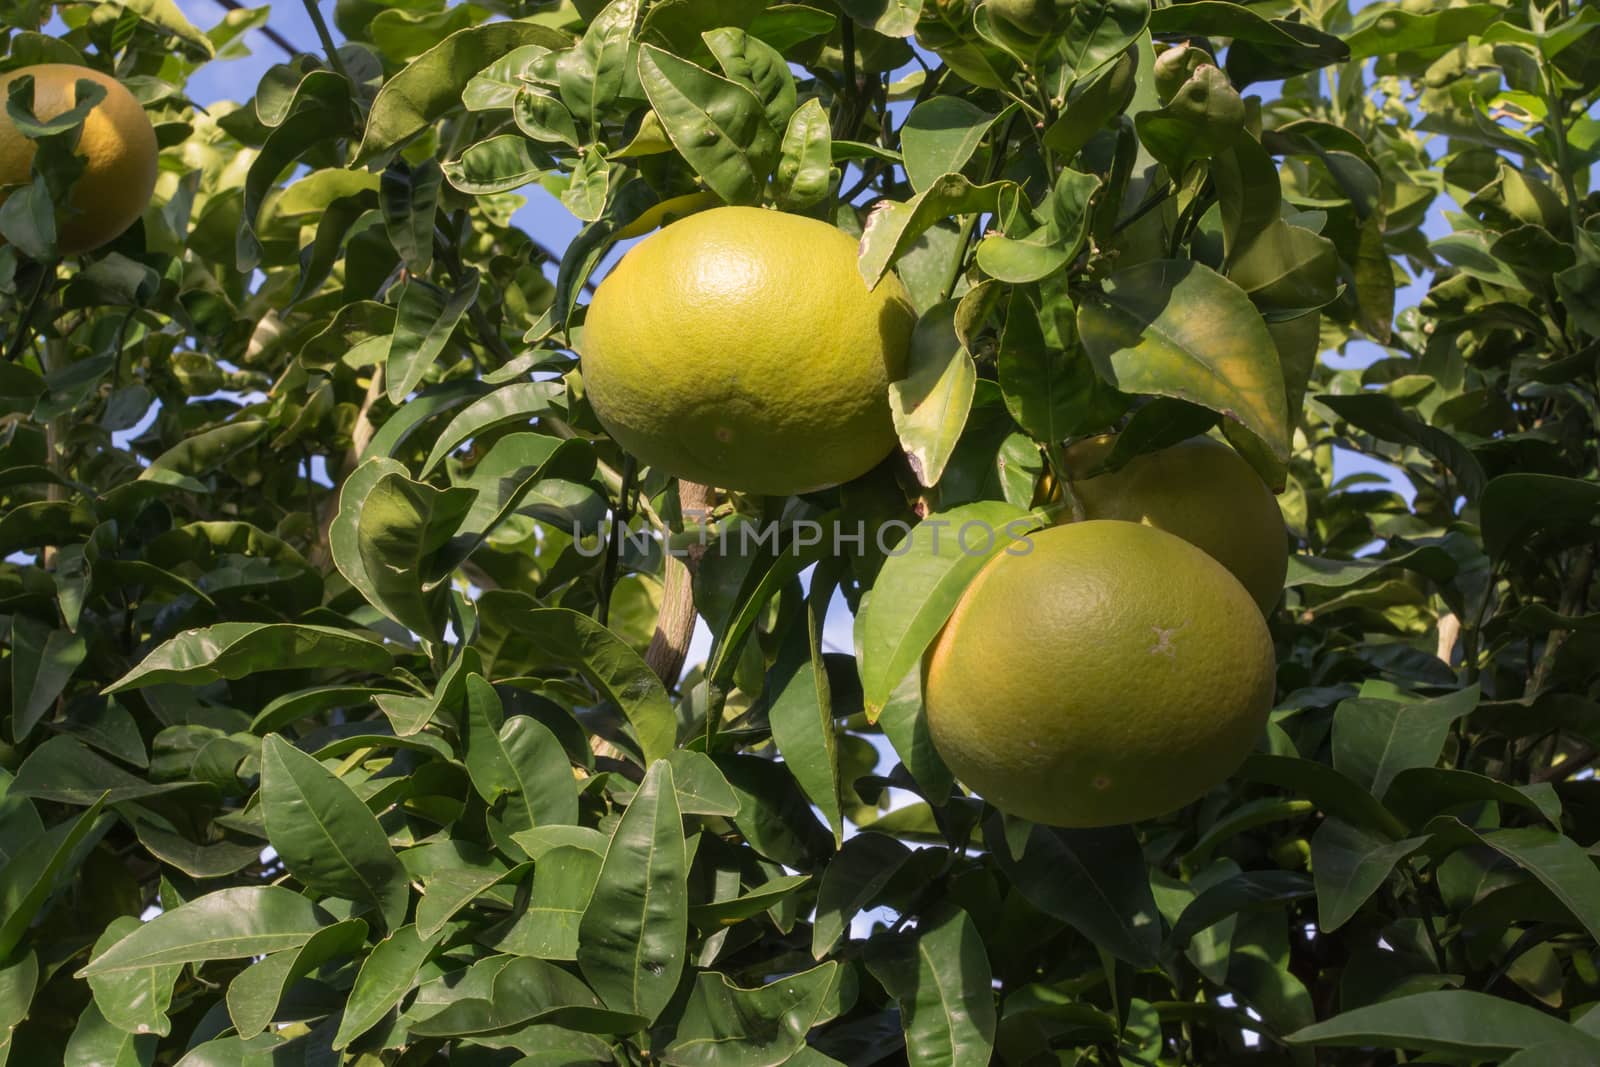 Grapefruits ripening on the tree by ArtesiaWells